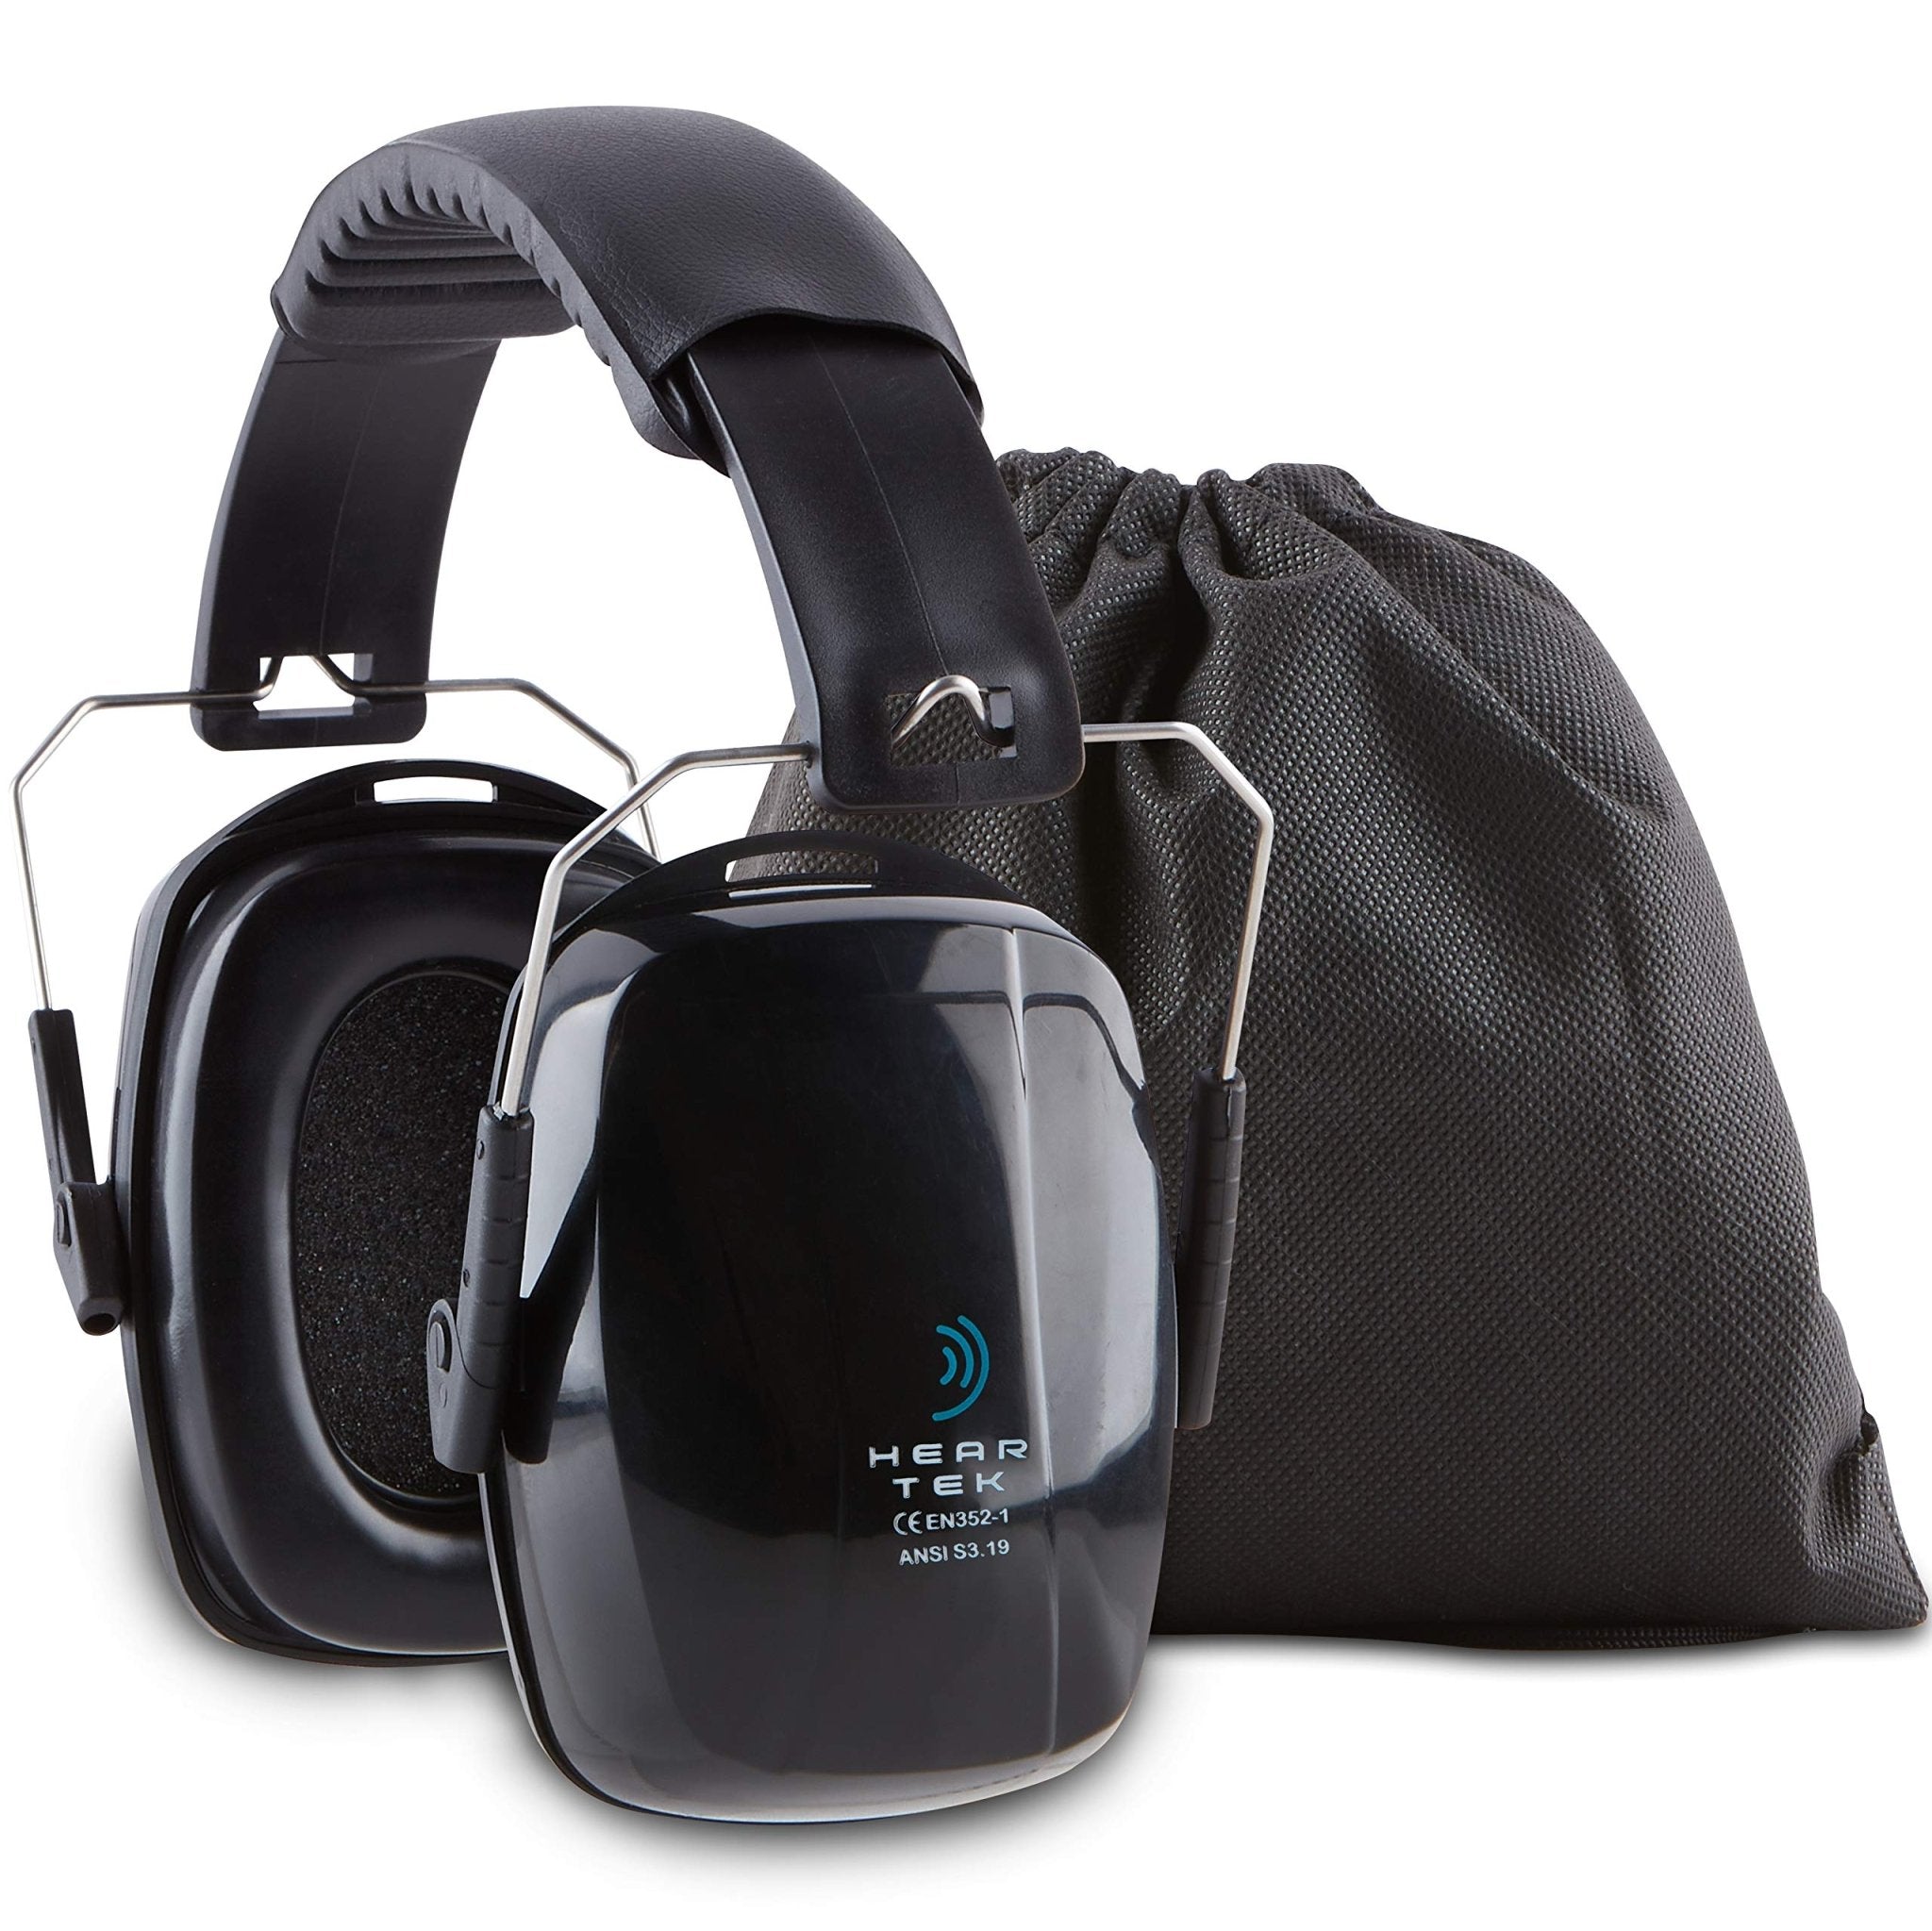 Hearing Protection Noise Cancelling Ear Muffs